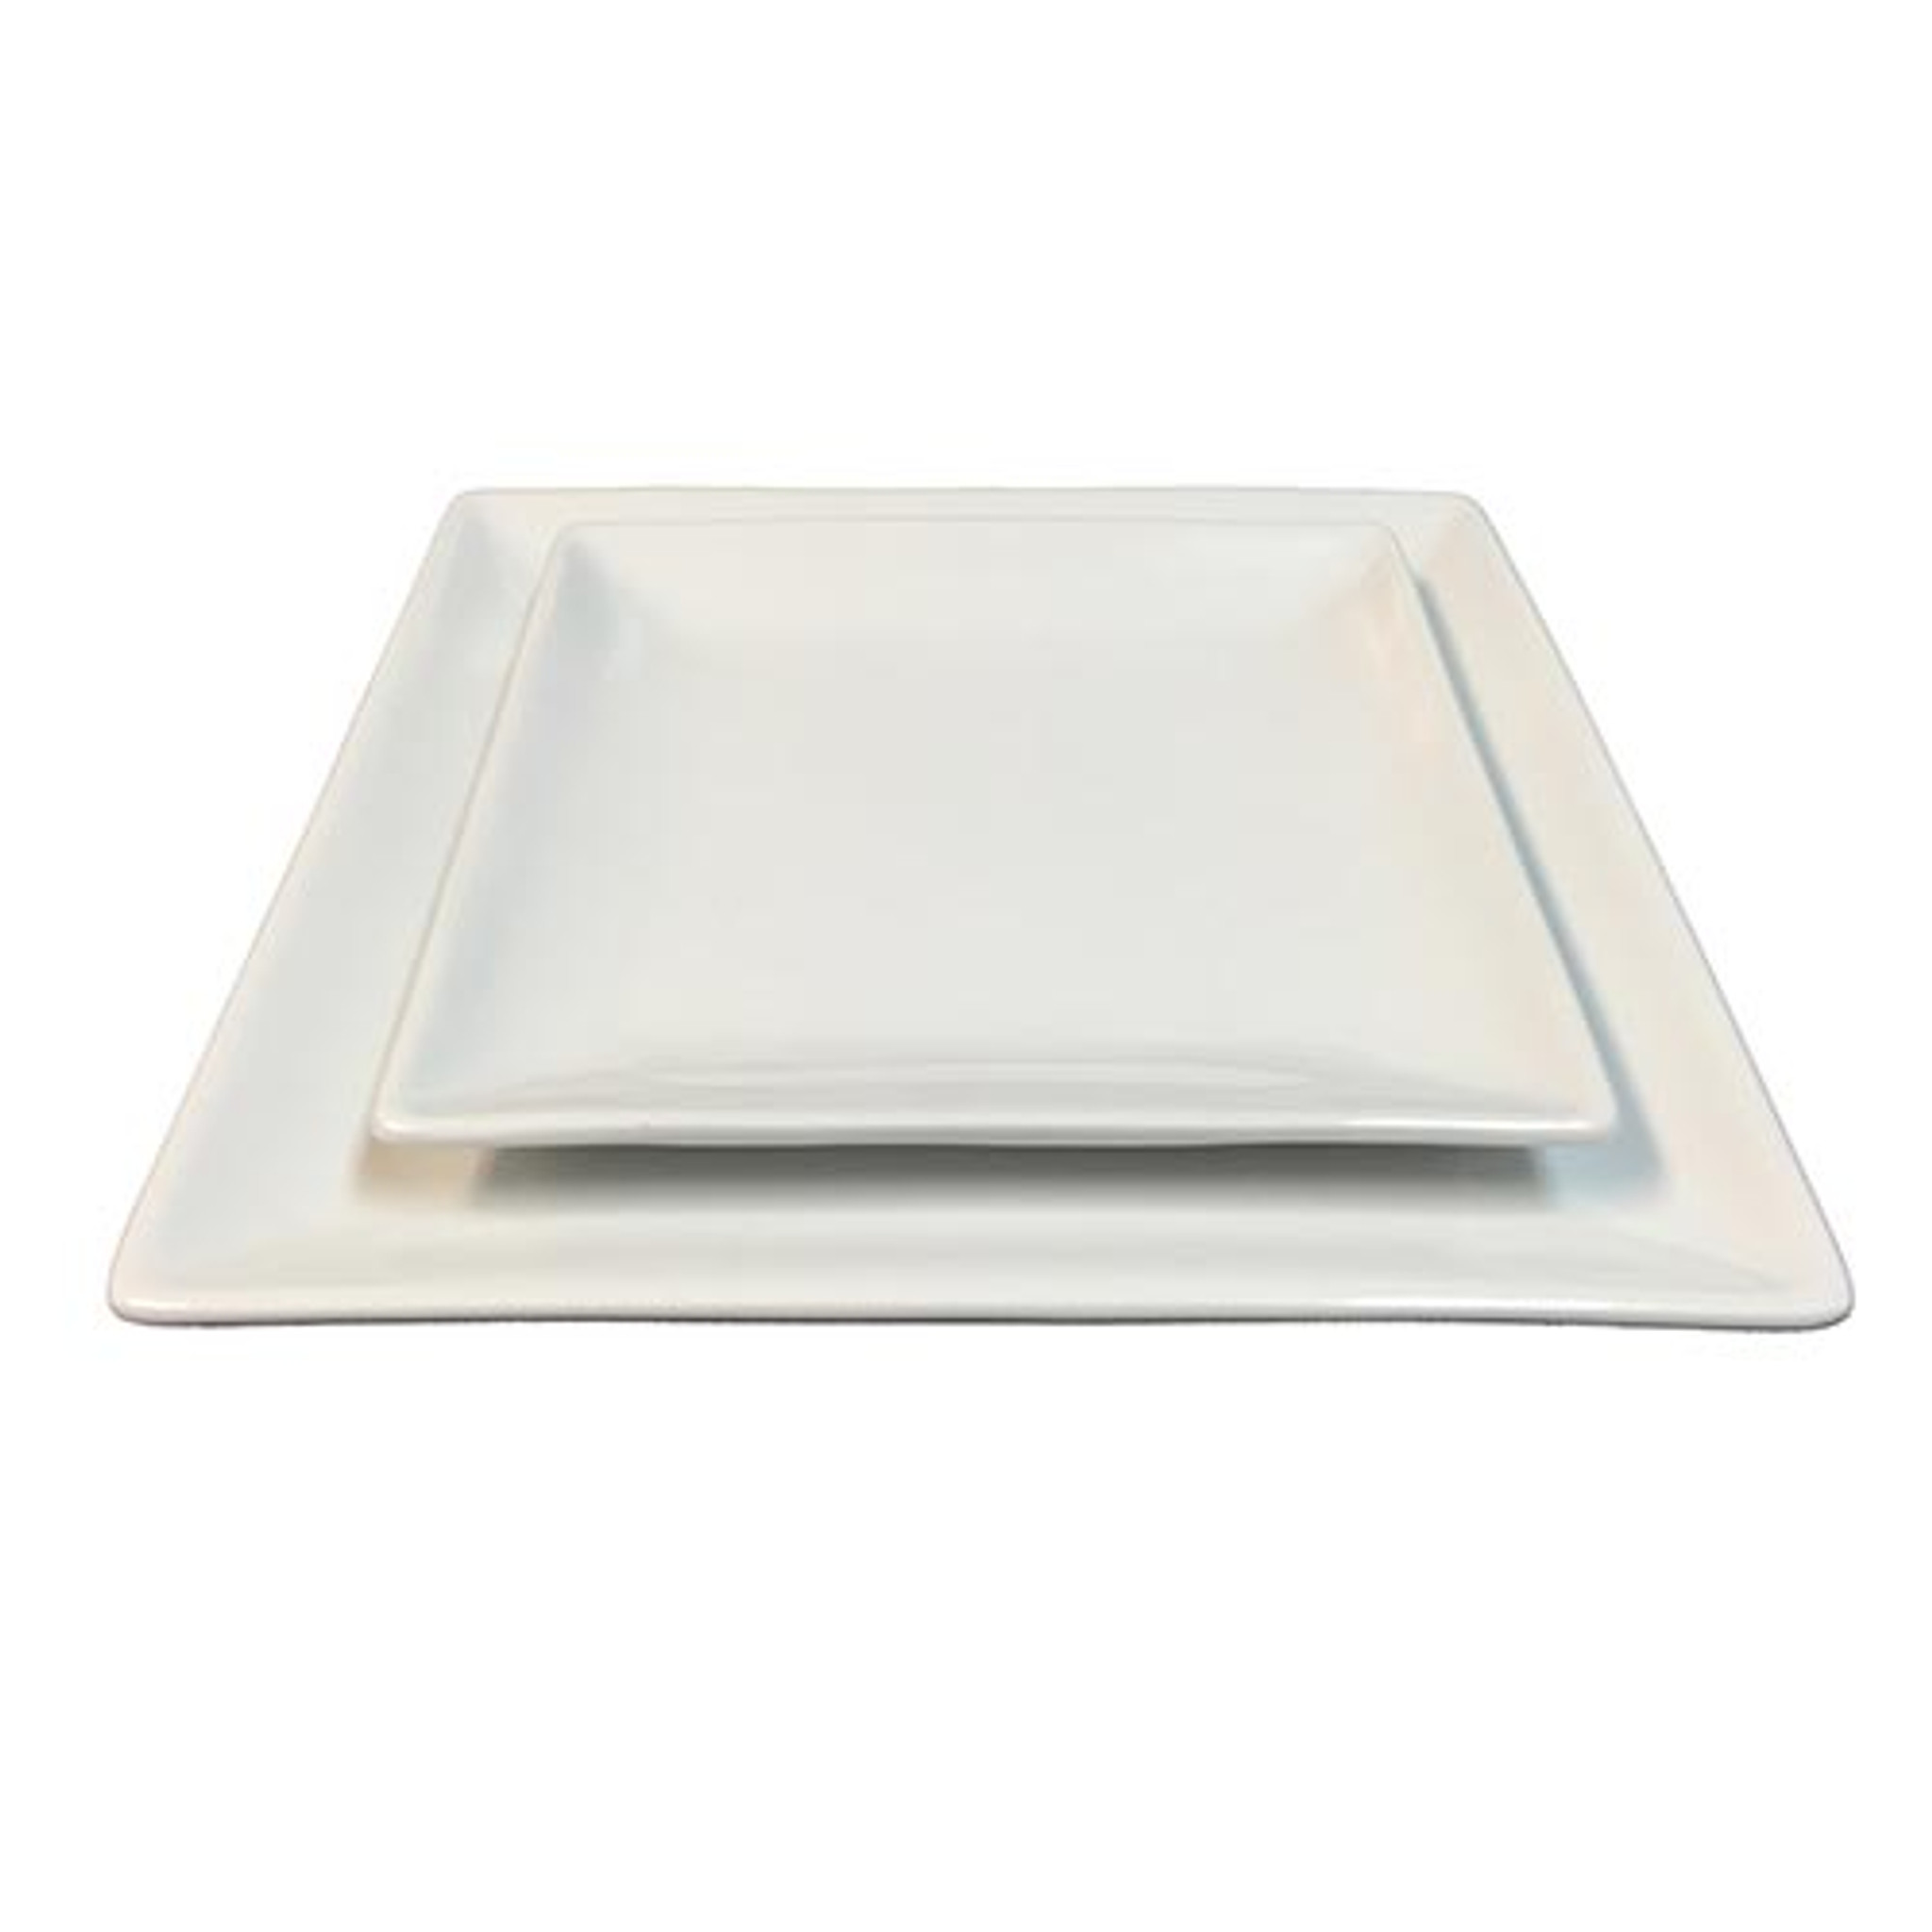 Square Plate, Vitrified Porcelain, Durable Hotel Ware